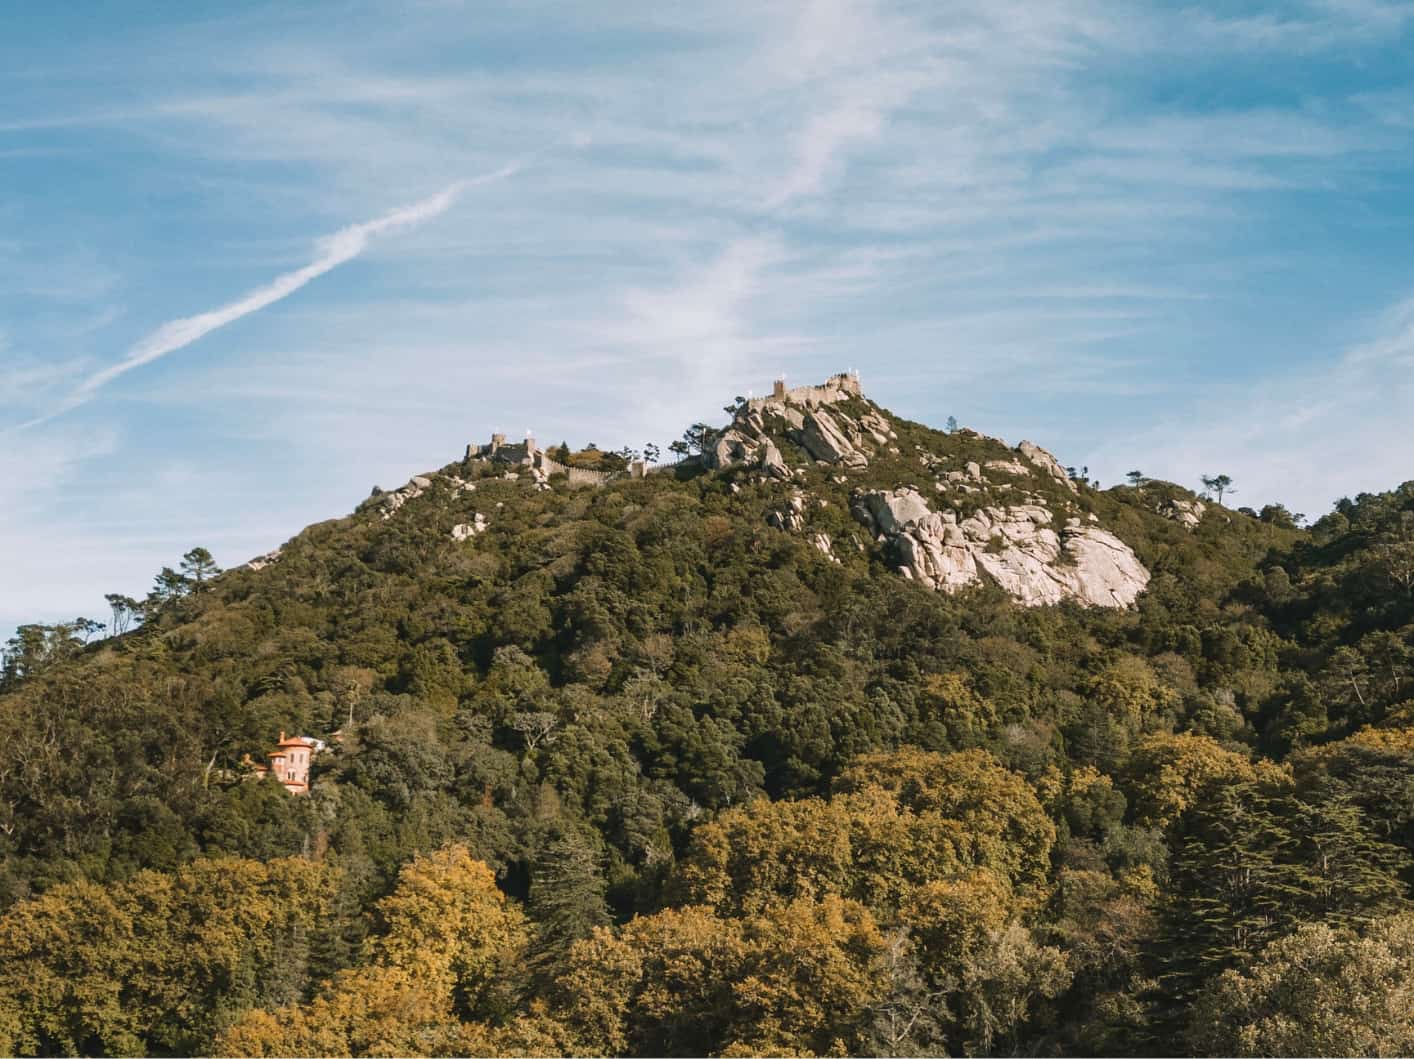 Castelo dos Mouros or The Moorish Castle at the top of the hill in Sintra. 